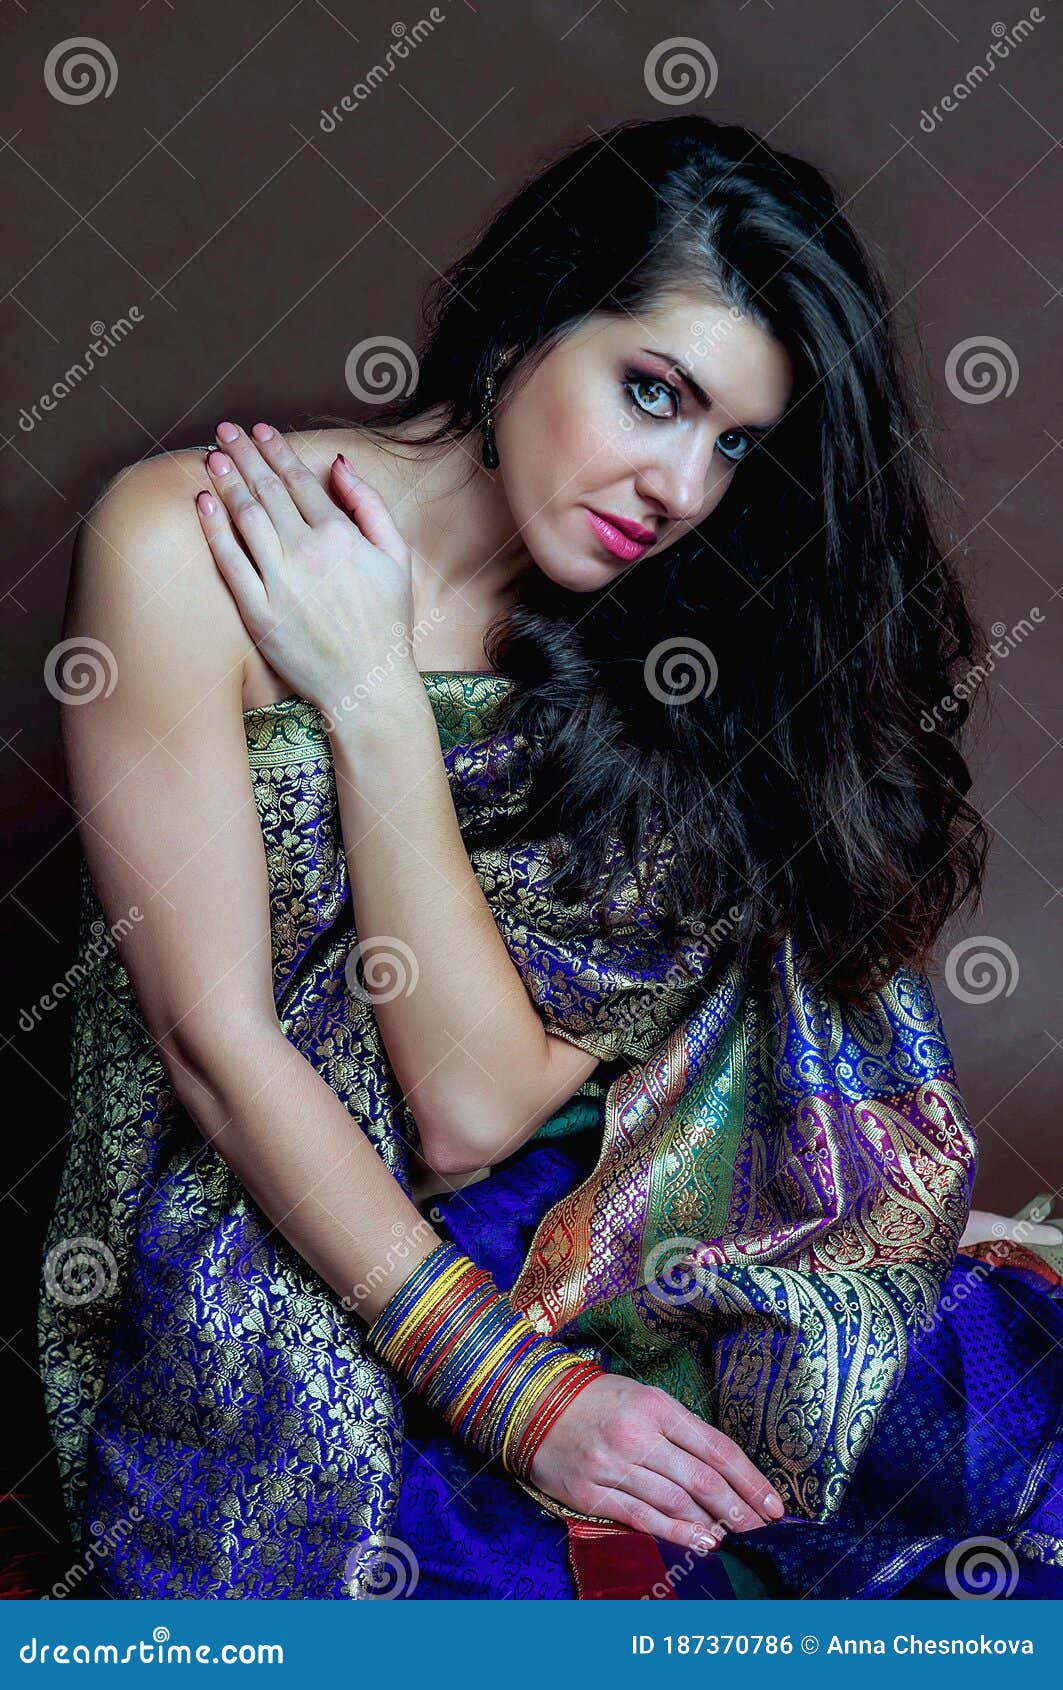 The Young Dark Haired Woman In A Bright Indian Sari And Colored